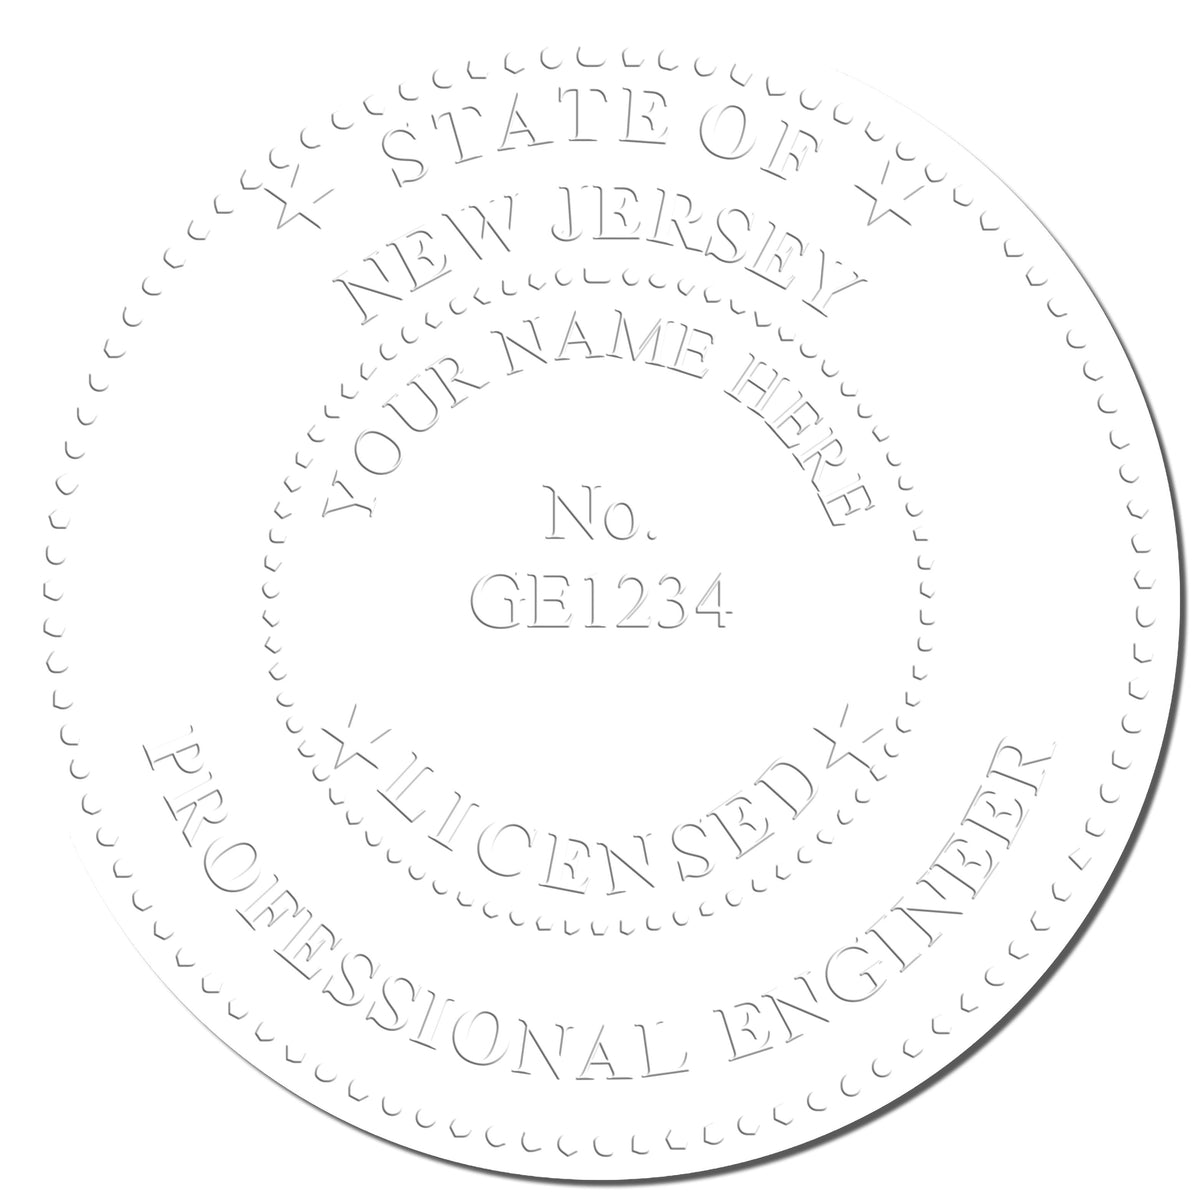 Another Example of a stamped impression of the New Jersey Engineer Desk Seal on a piece of office paper.